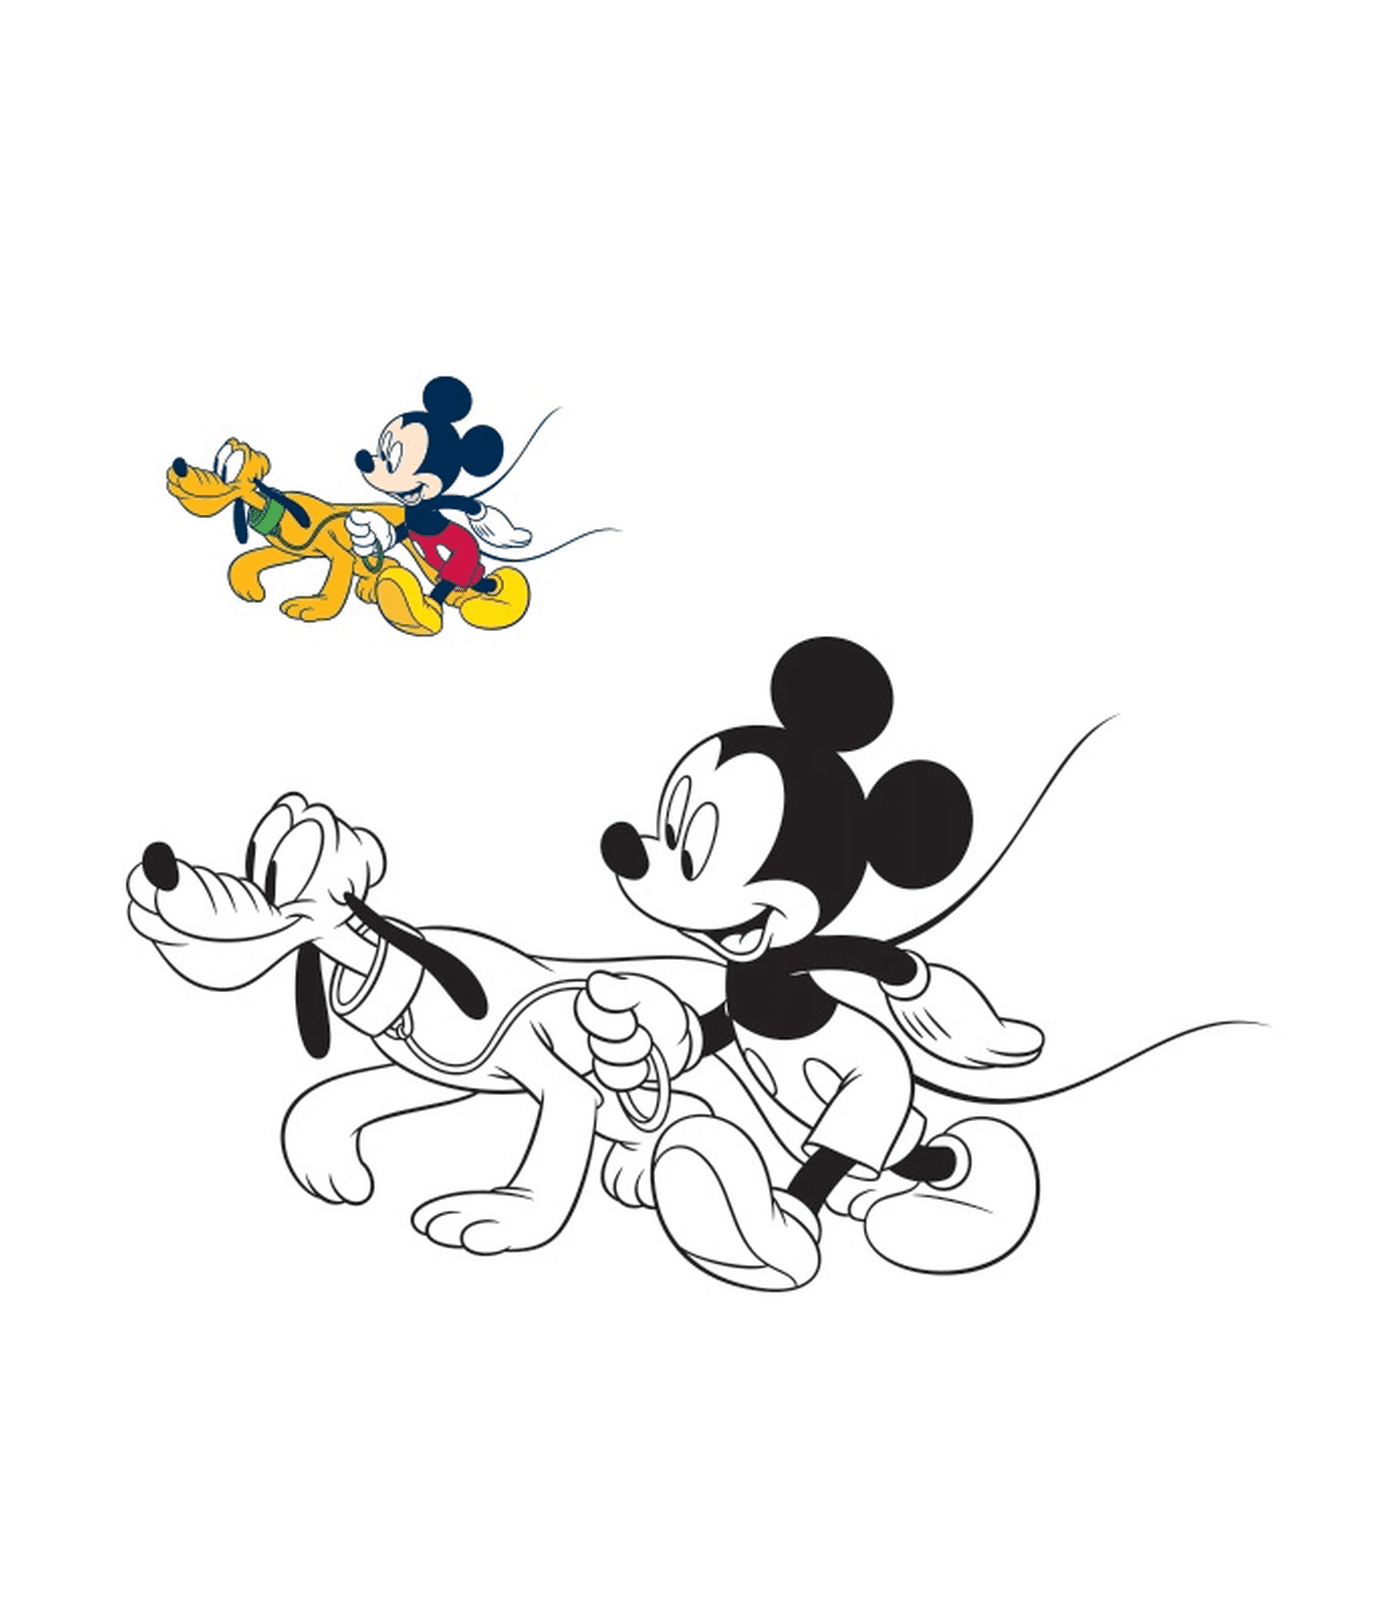  Mickey Mouse walks with his dog Pluto 